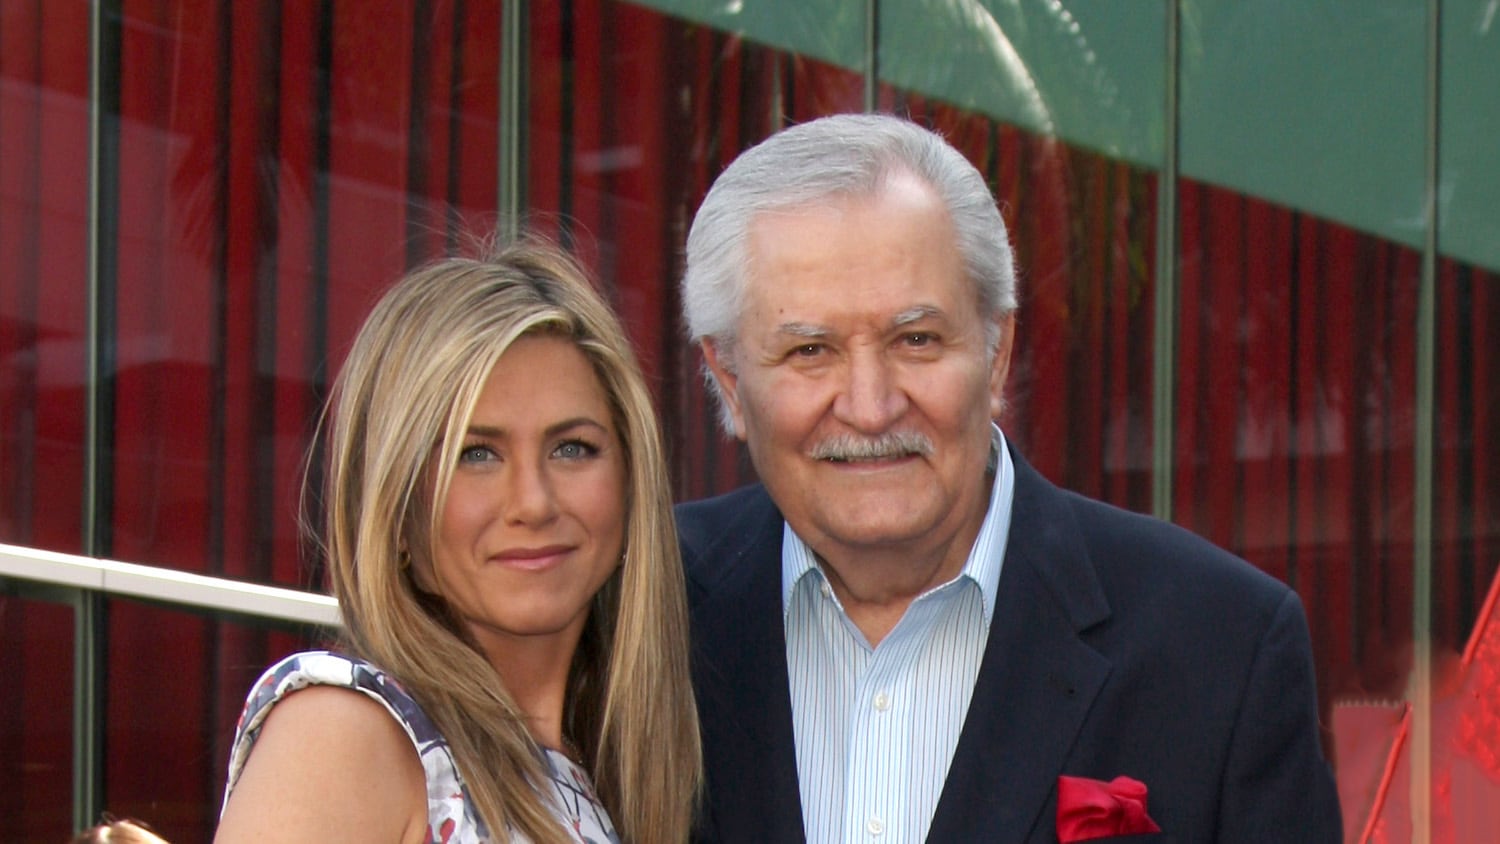 John Aniston, ‘Days of Our Lives’ Star & Jennifer Aniston’s Father, Dies At 89